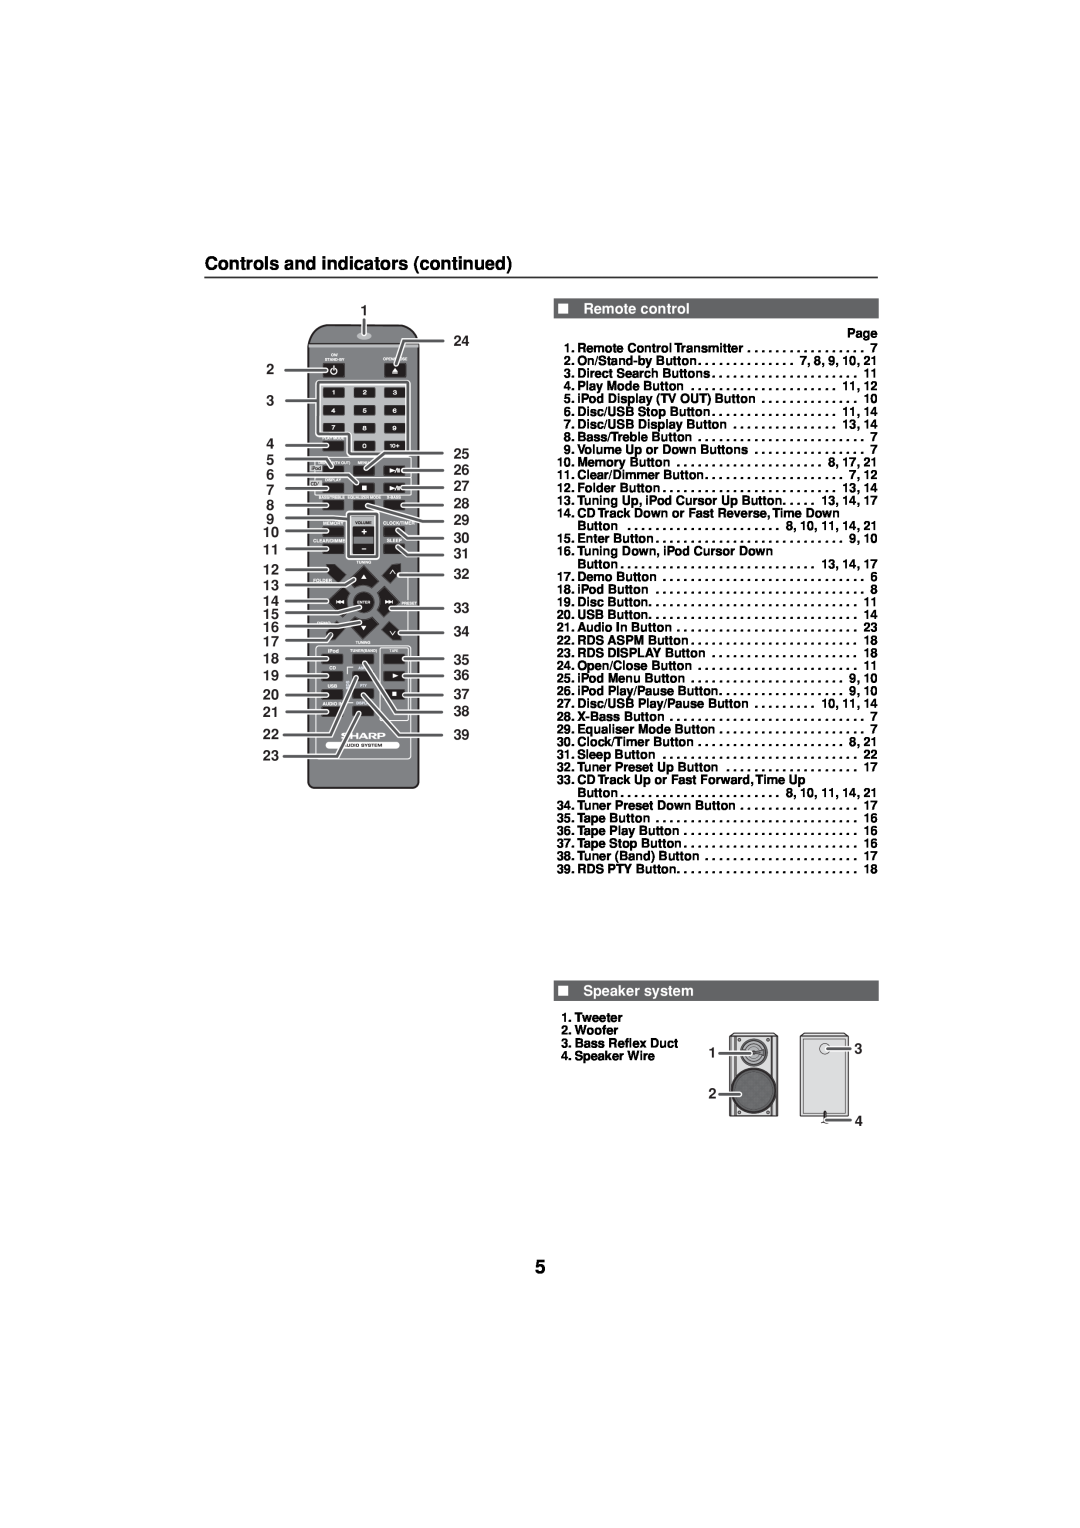 Sharp CD-DH790NH operation manual Controls and indicators continued, Remote control, Speaker system 